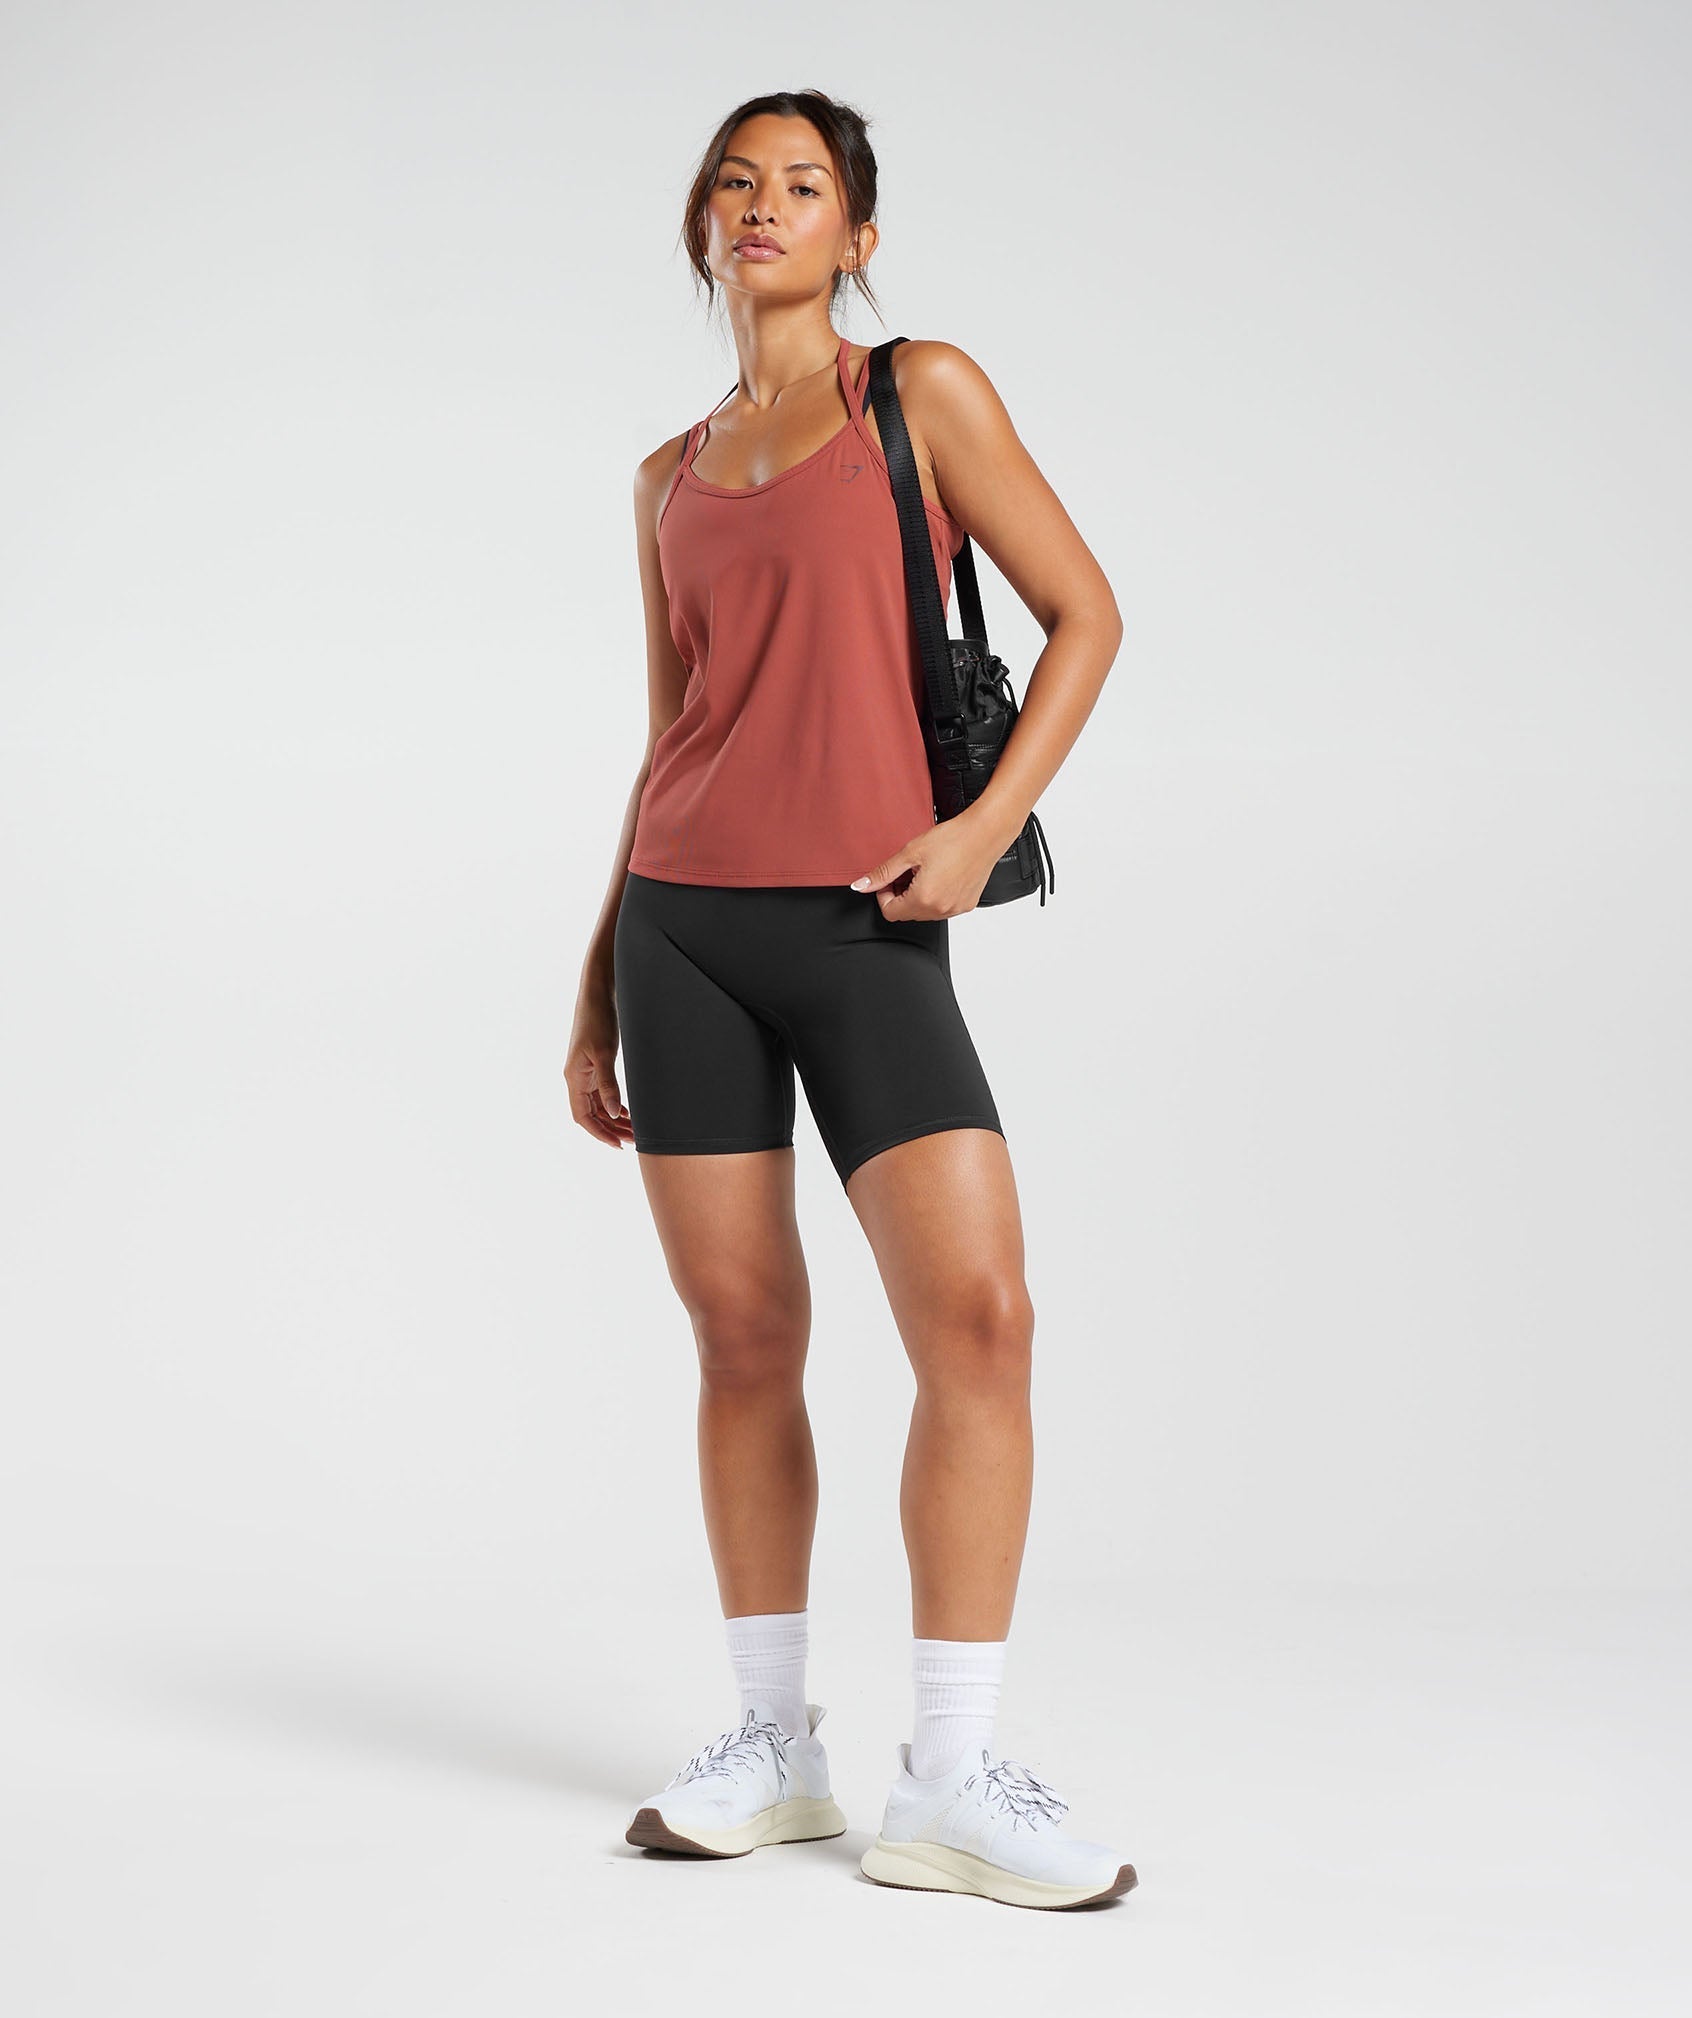 Elevate Strappy Tank in Rust Red - view 4